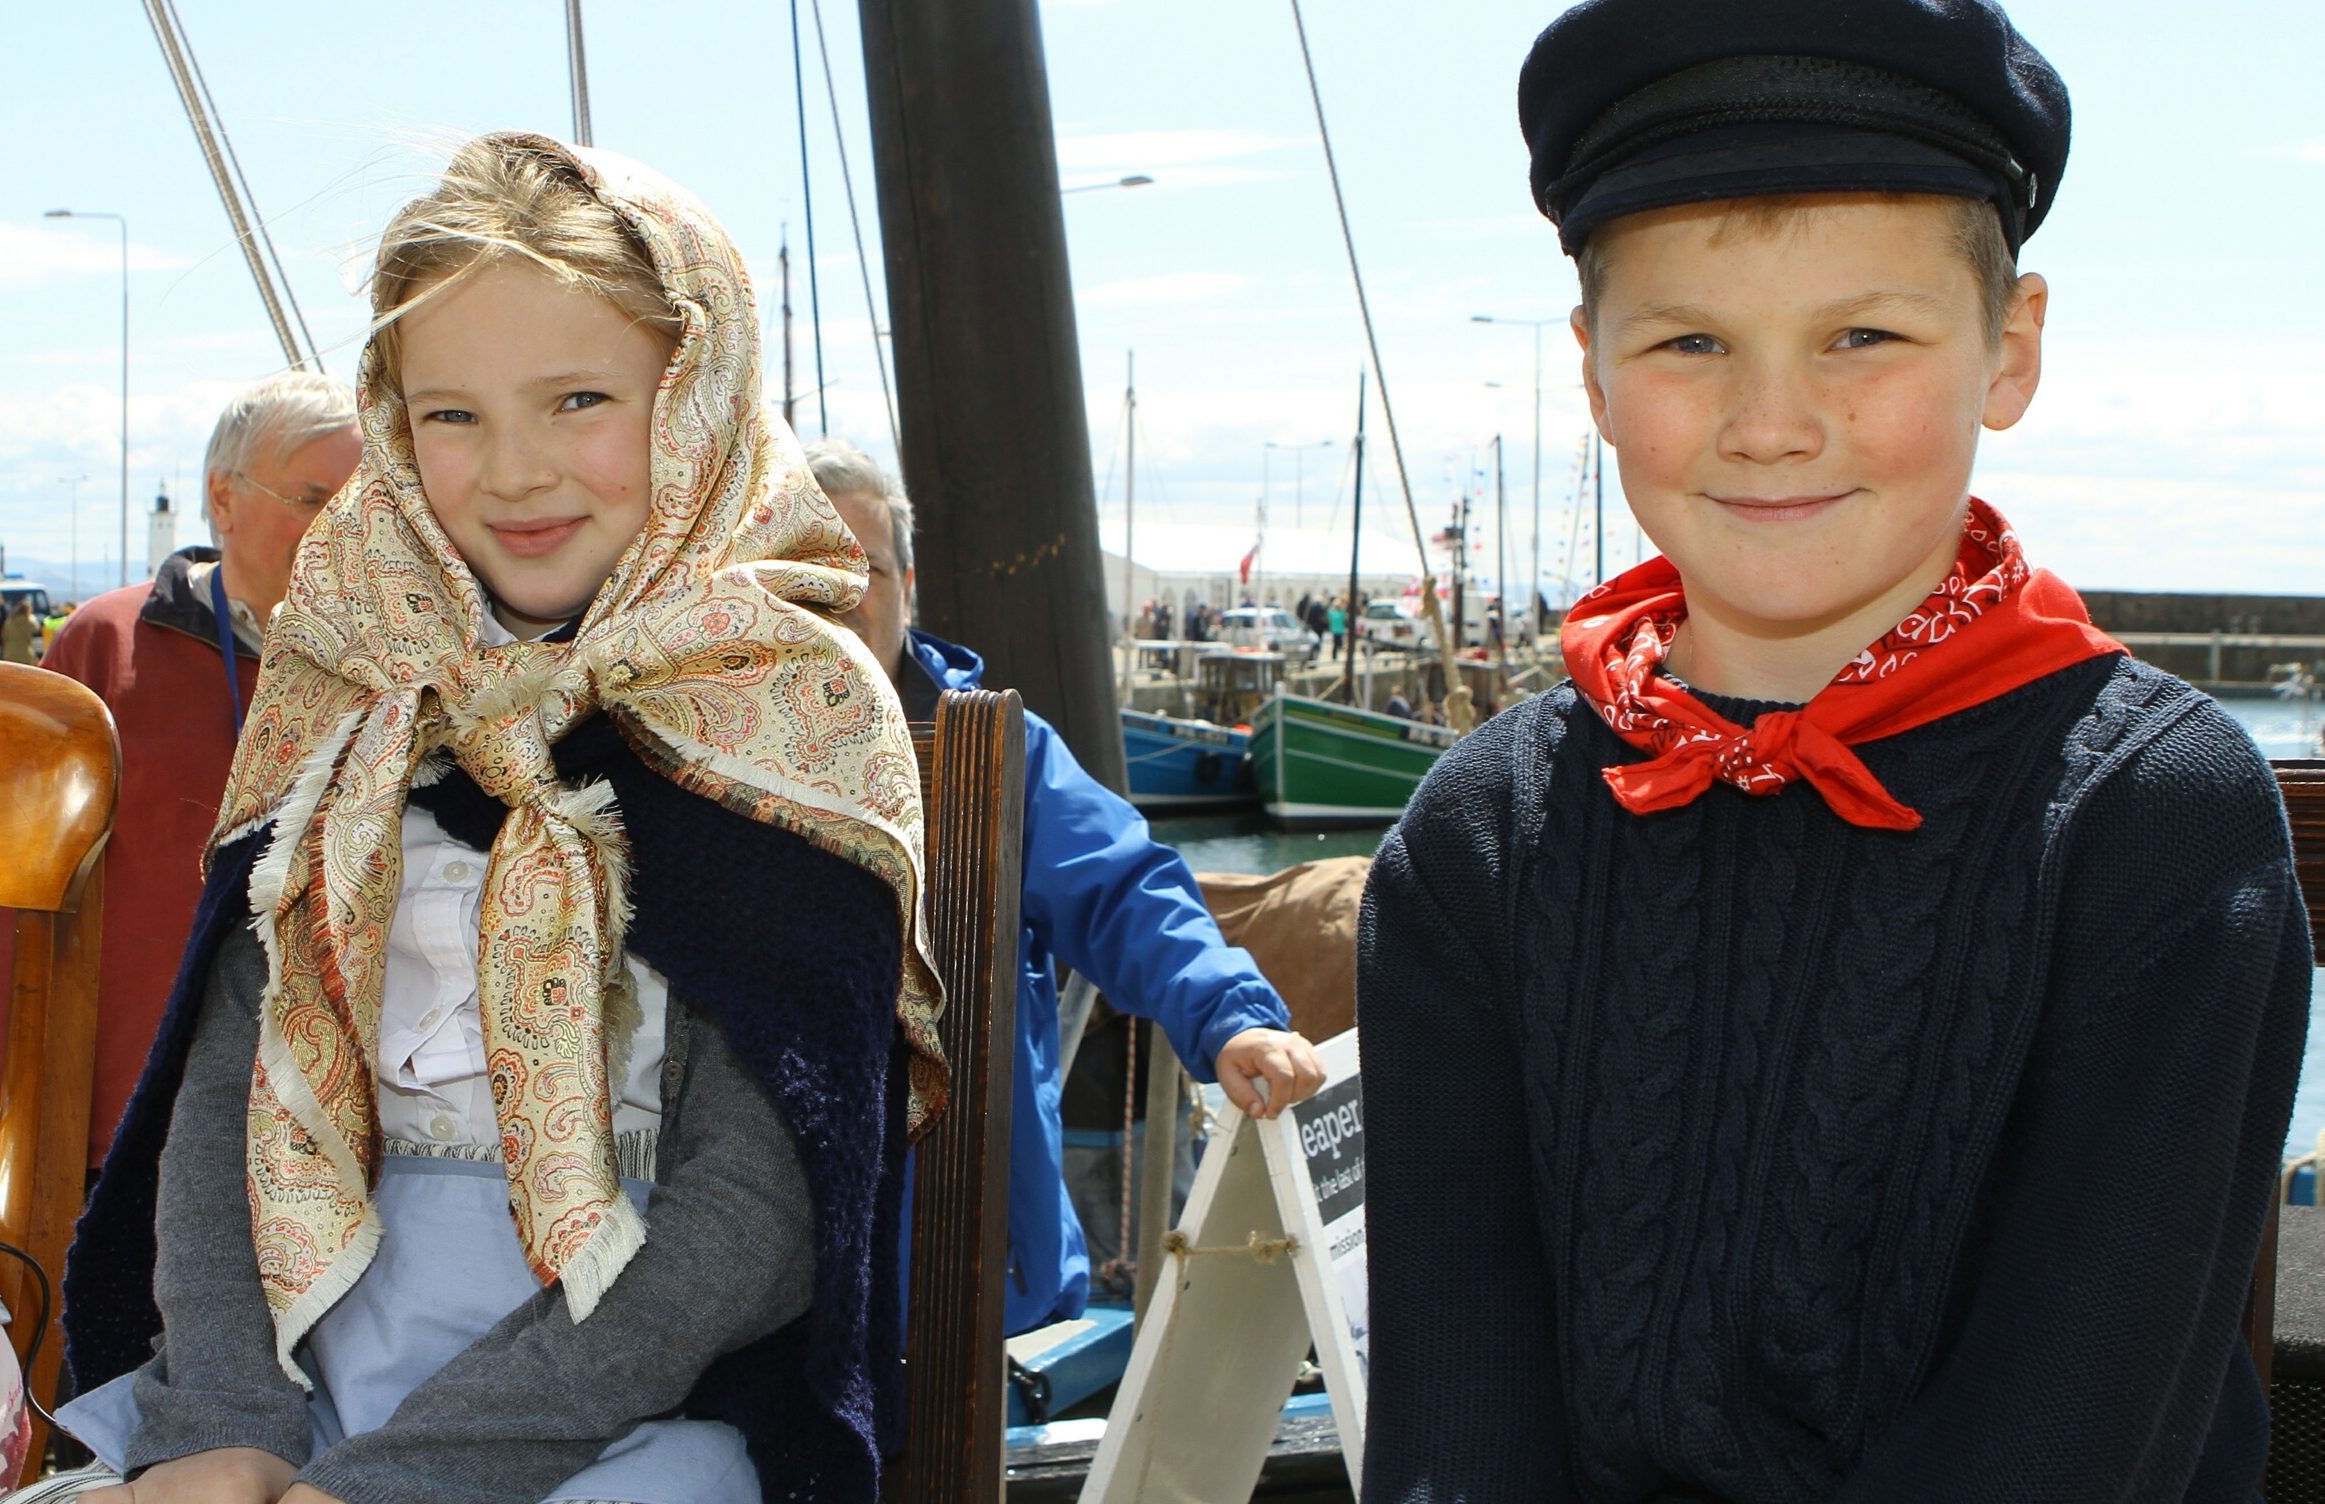 The 2015 Anstruther Harbour Festival Fisher Lass - Jenny Hodge and the Fisher Lad - Jamie Anderson.